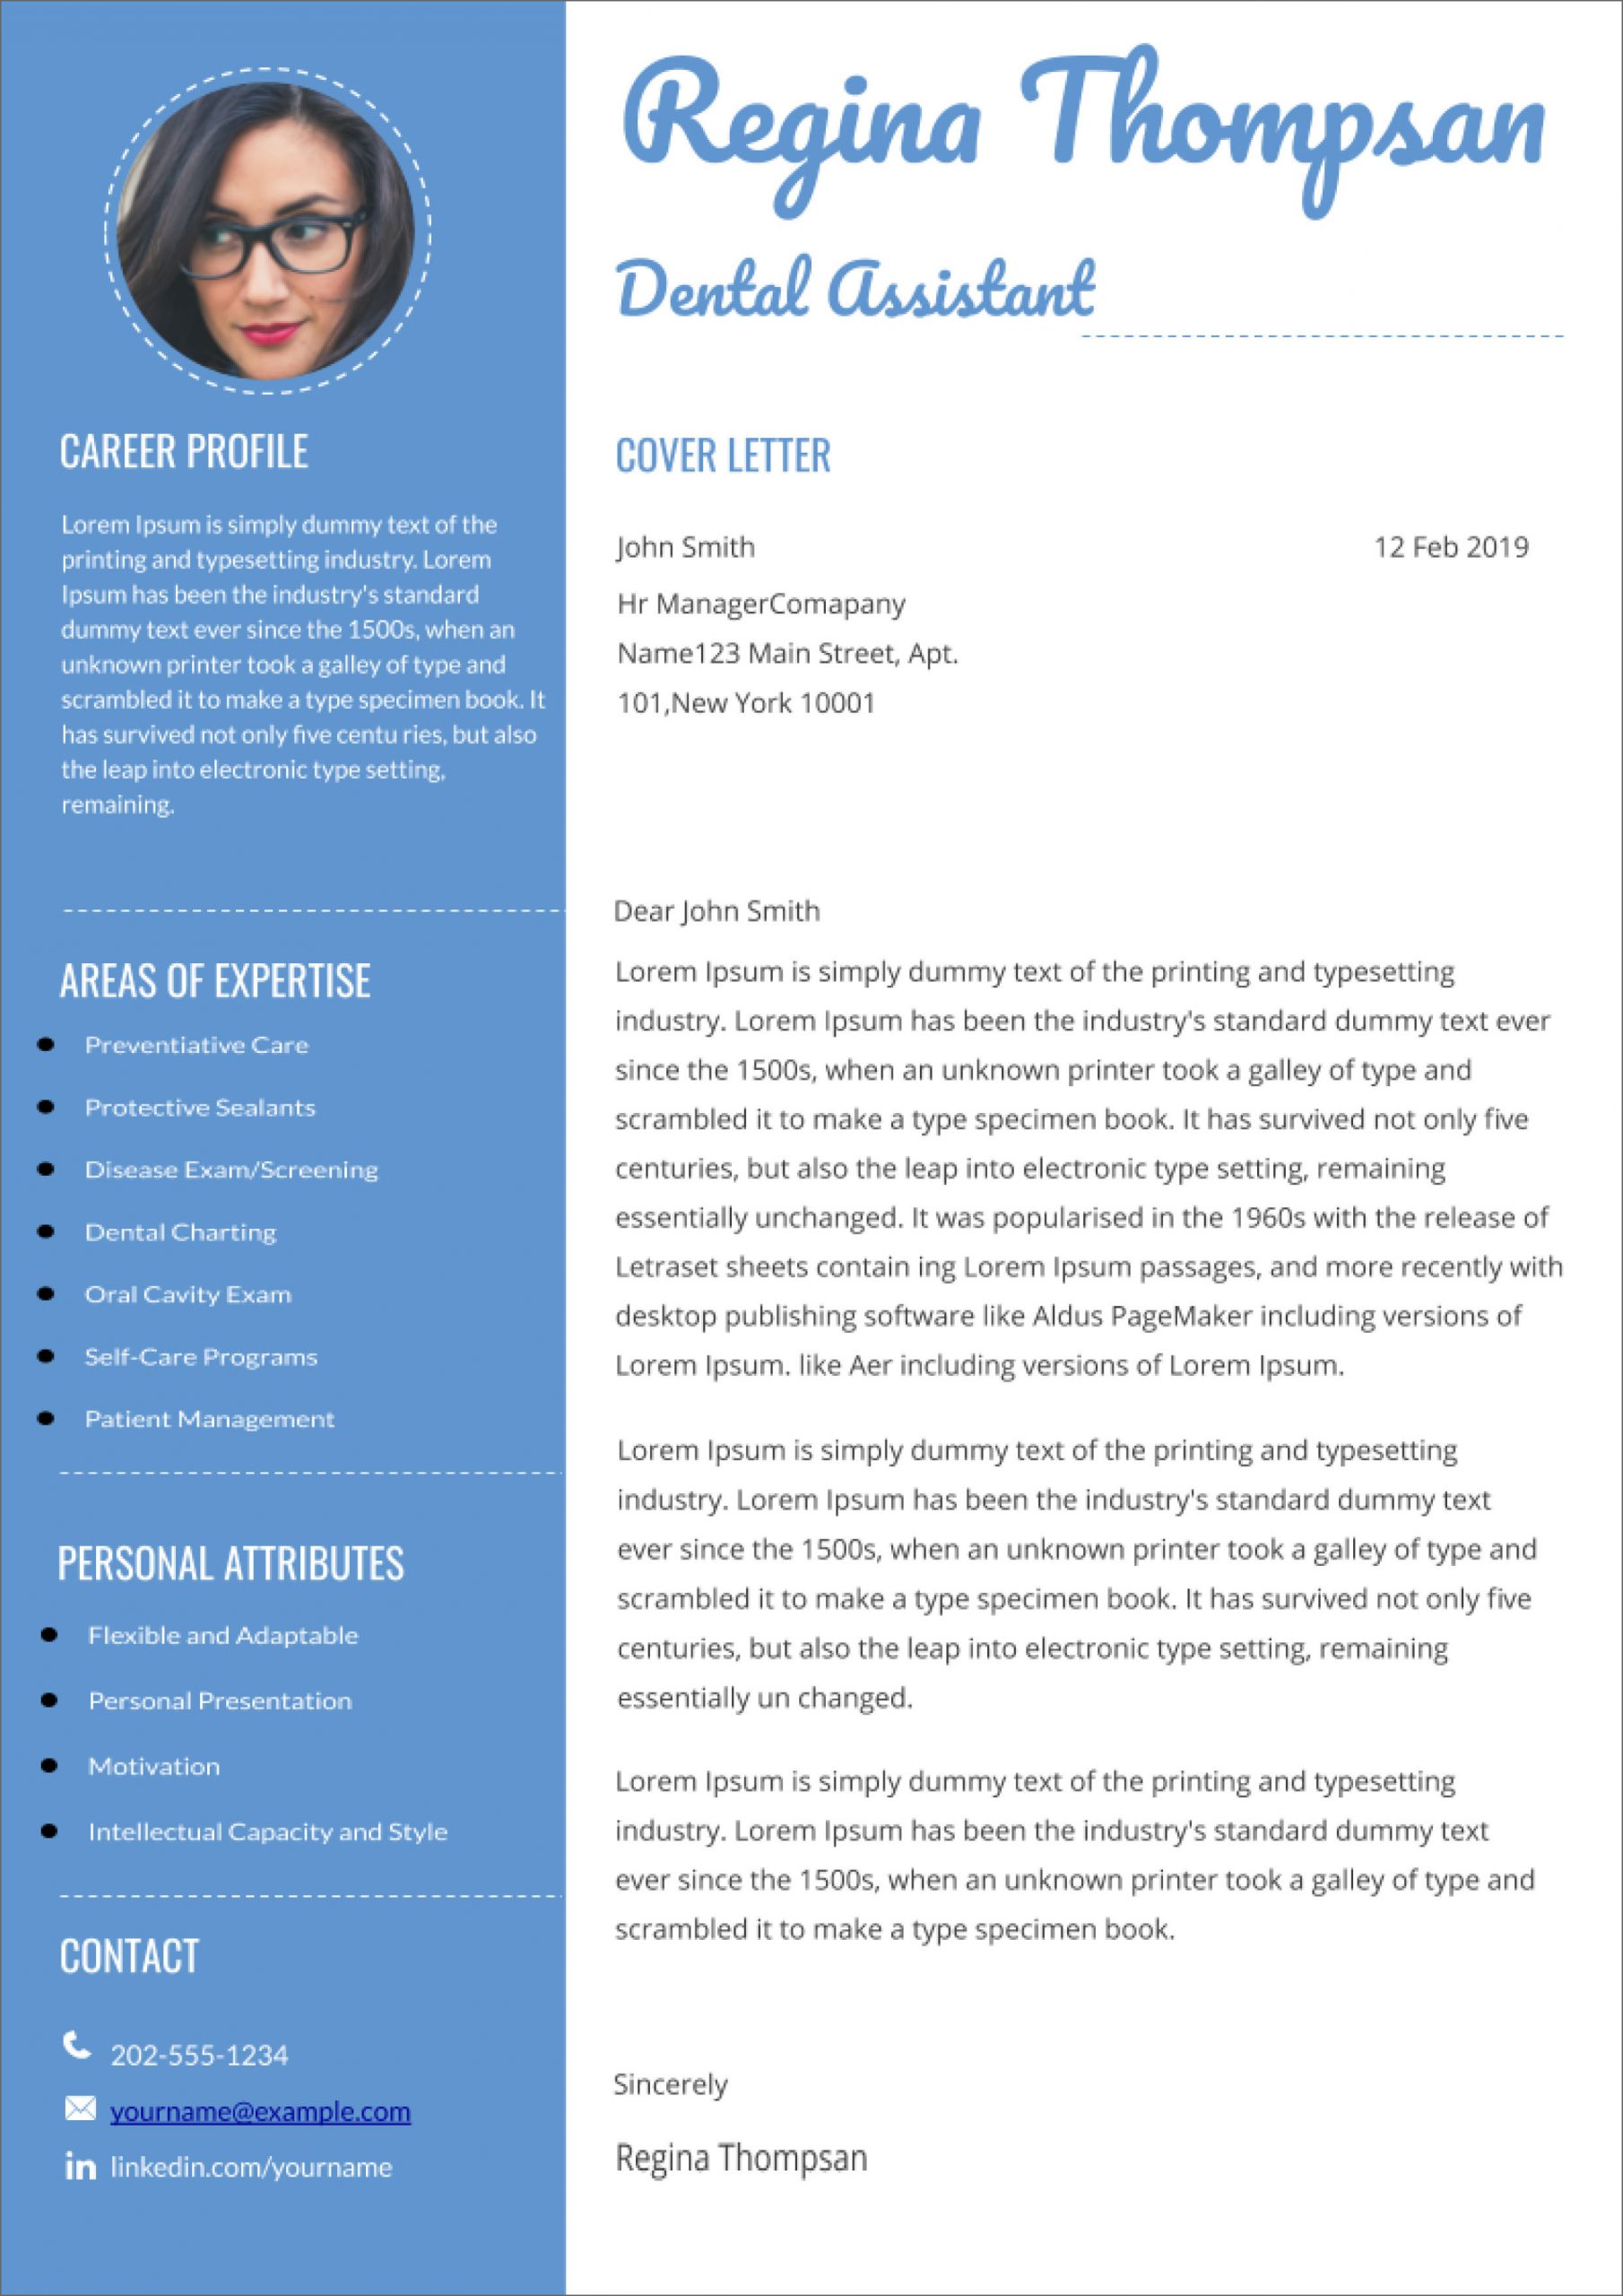 Cover Letter Template Free 13 Free Cover Letter Templates for Microsoft Word Docx and